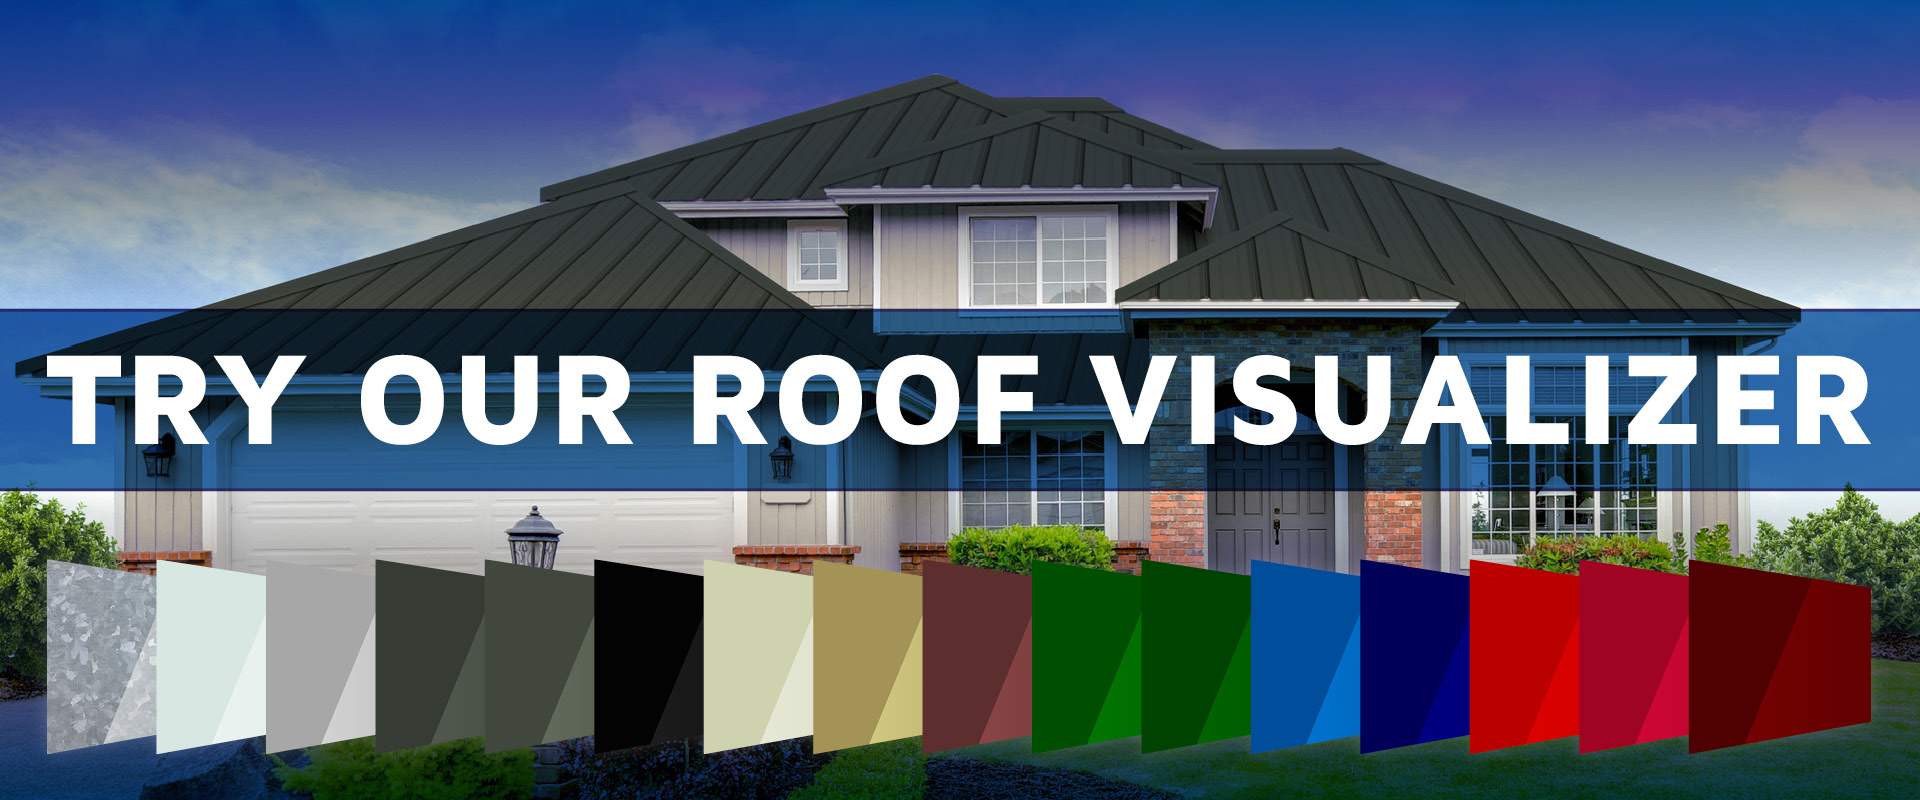 Roof Visualizer